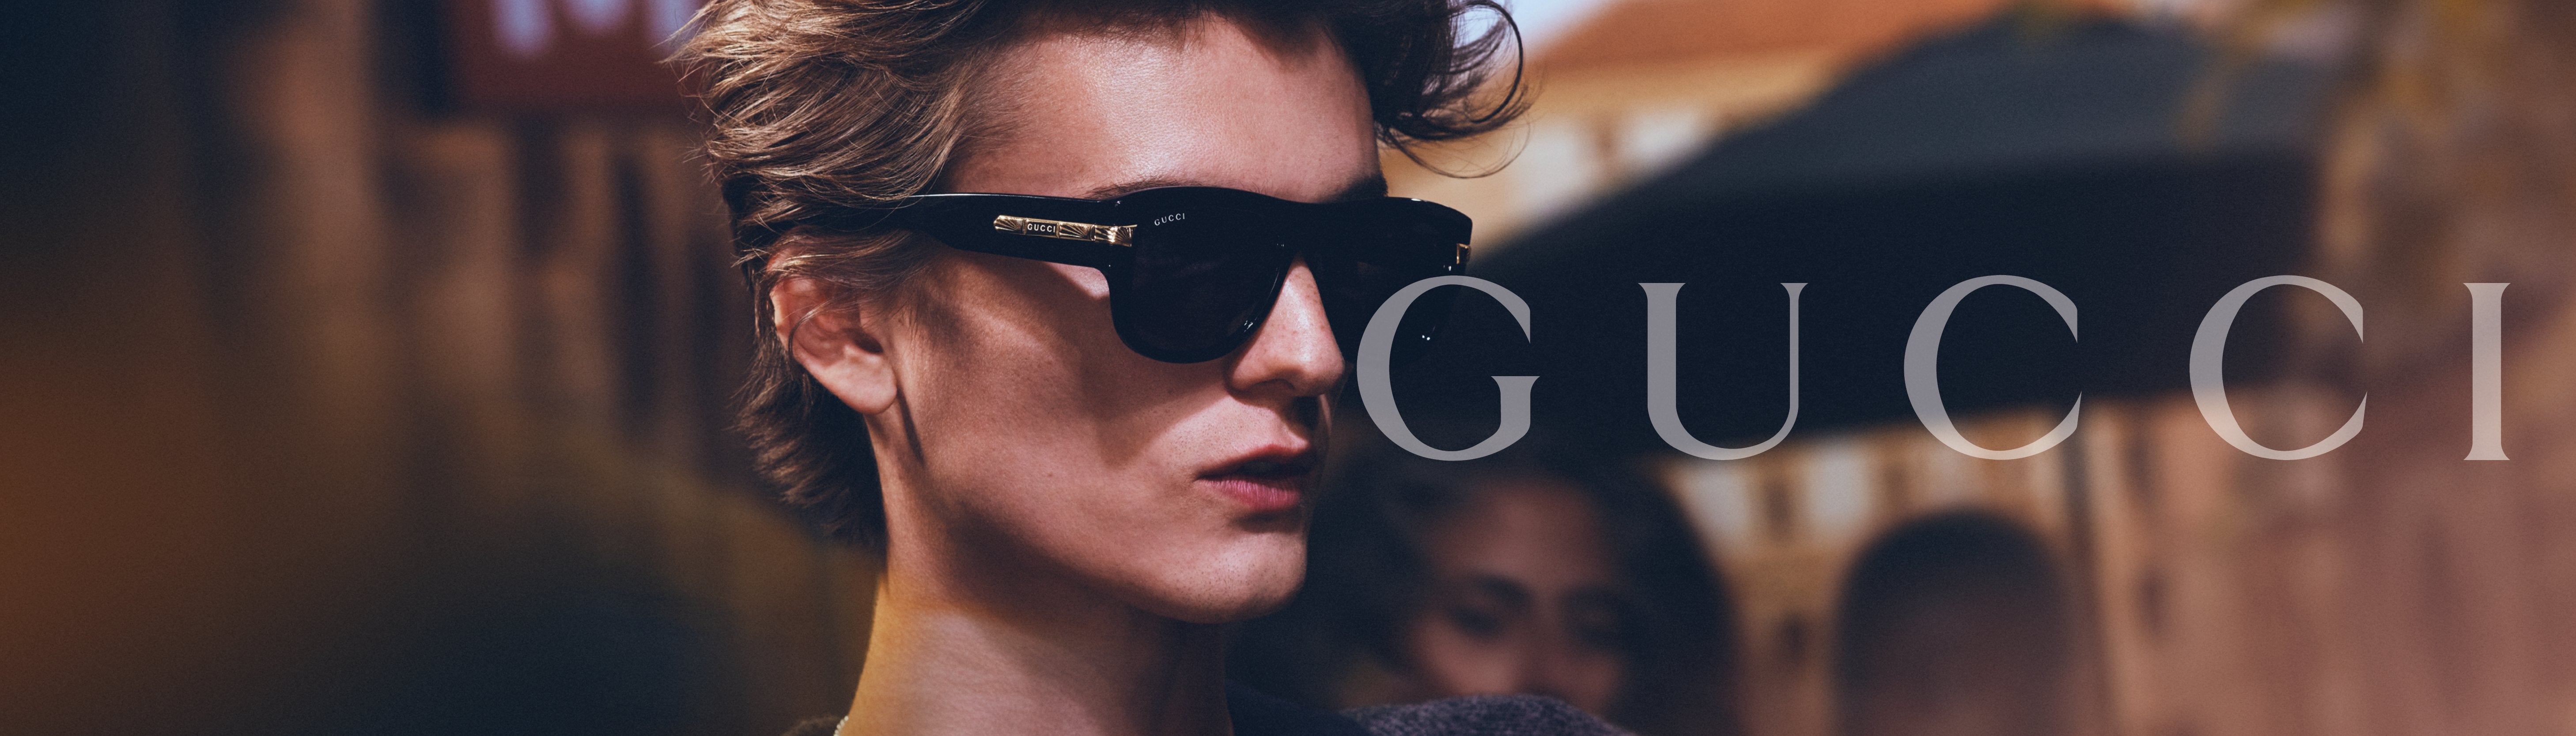 Gucci CEO Bizzarri to exit; Kering names group veteran to run transition